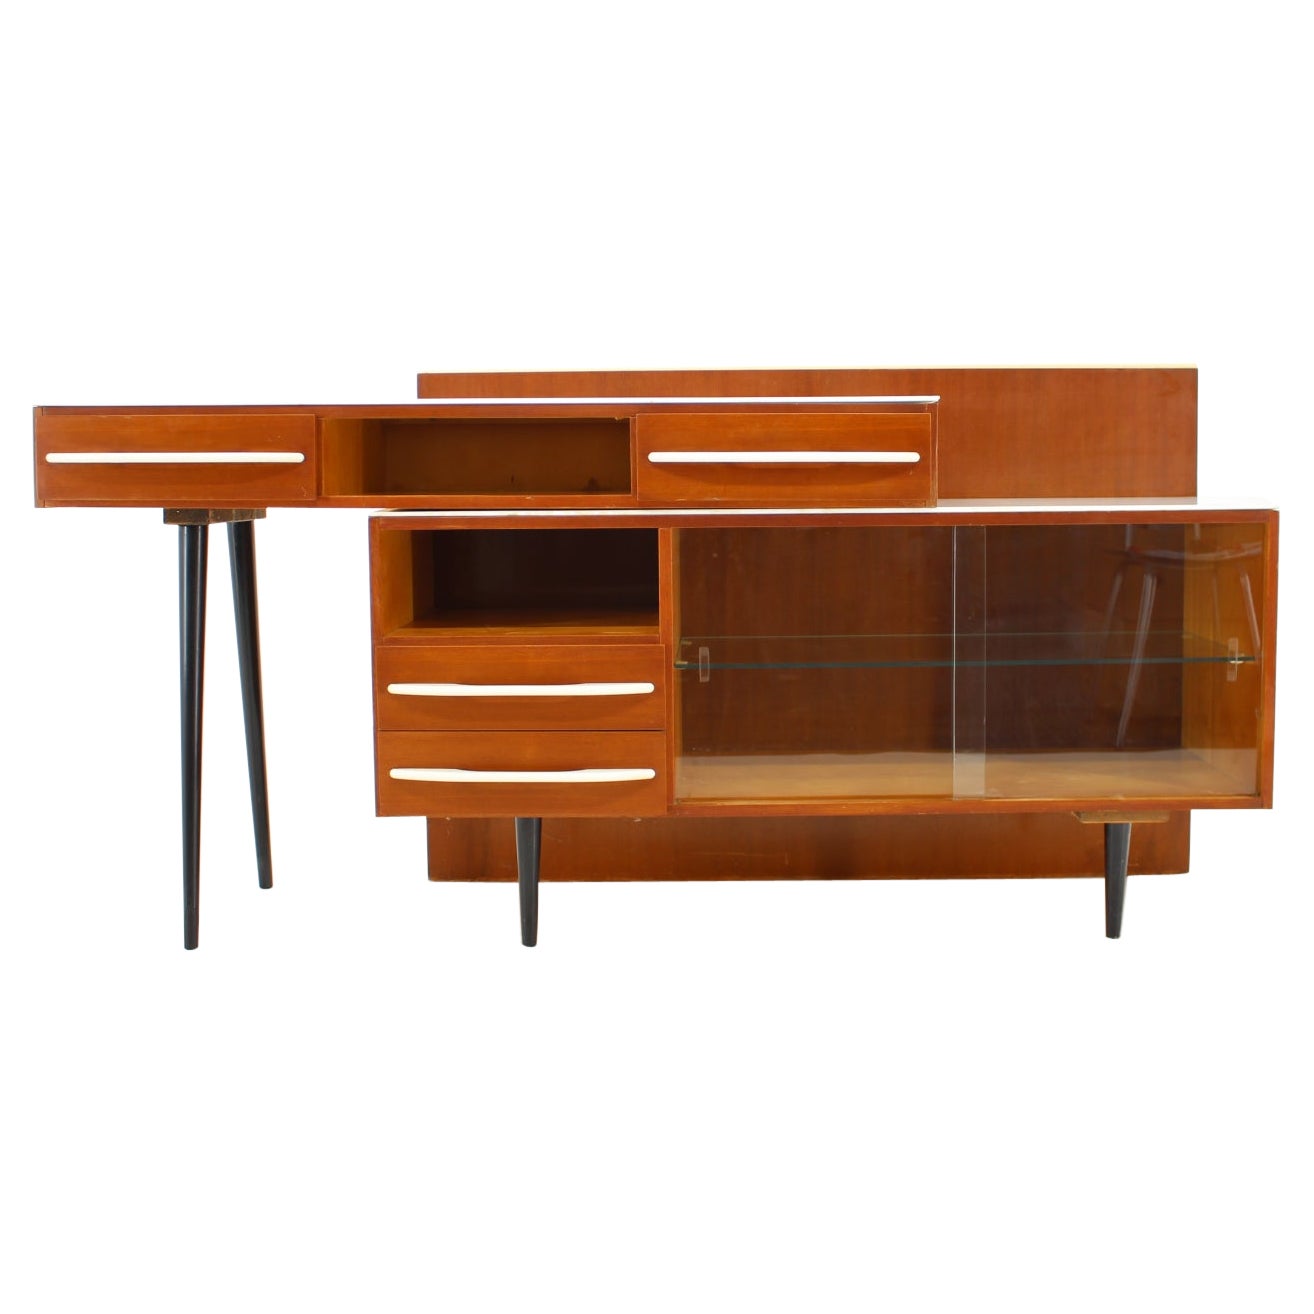 1960s M.Pozar Modular Set of Desk and Chest of Drawers, Czechoslovakia